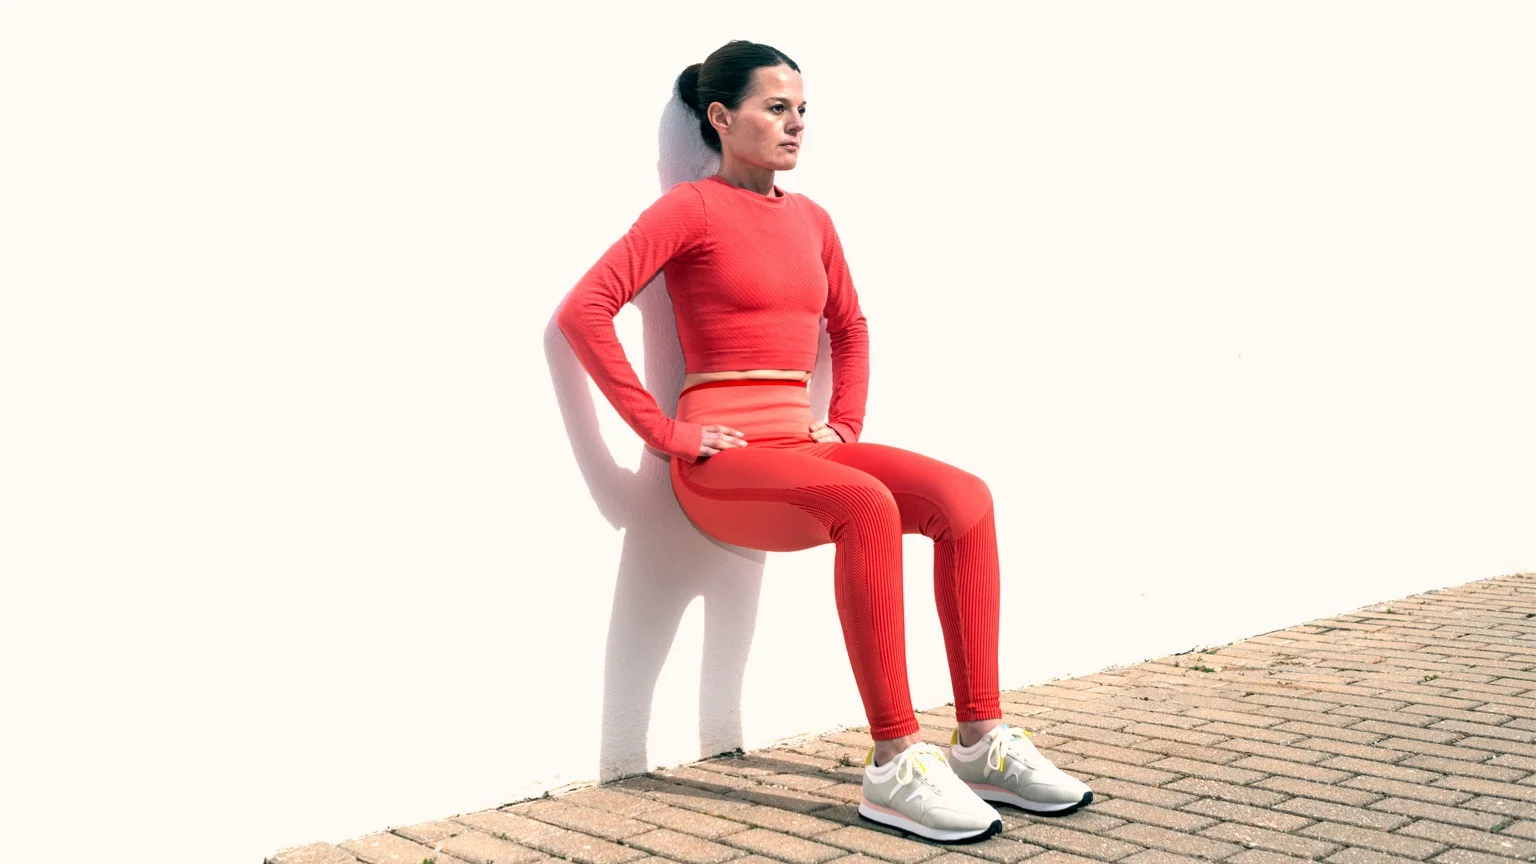 photo - Athletic woman performs a wall sit